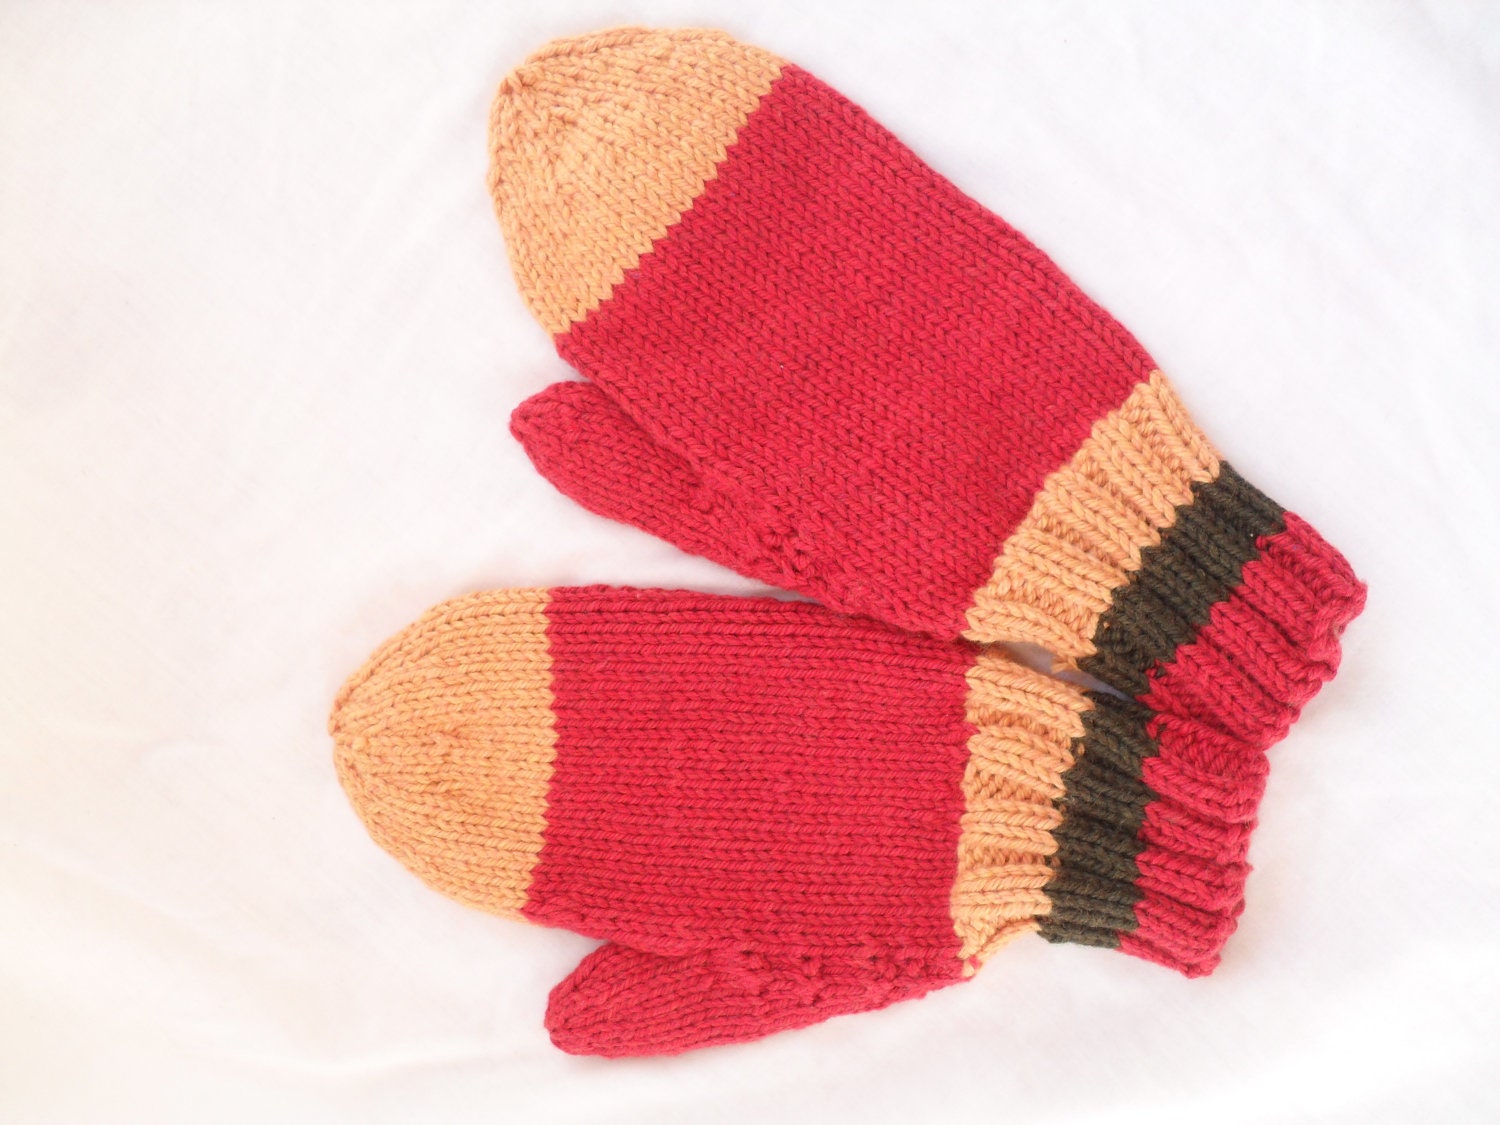 Organic Child Mittens Red Gold and Green, Vegan Knit Mitts - Tswamithreads